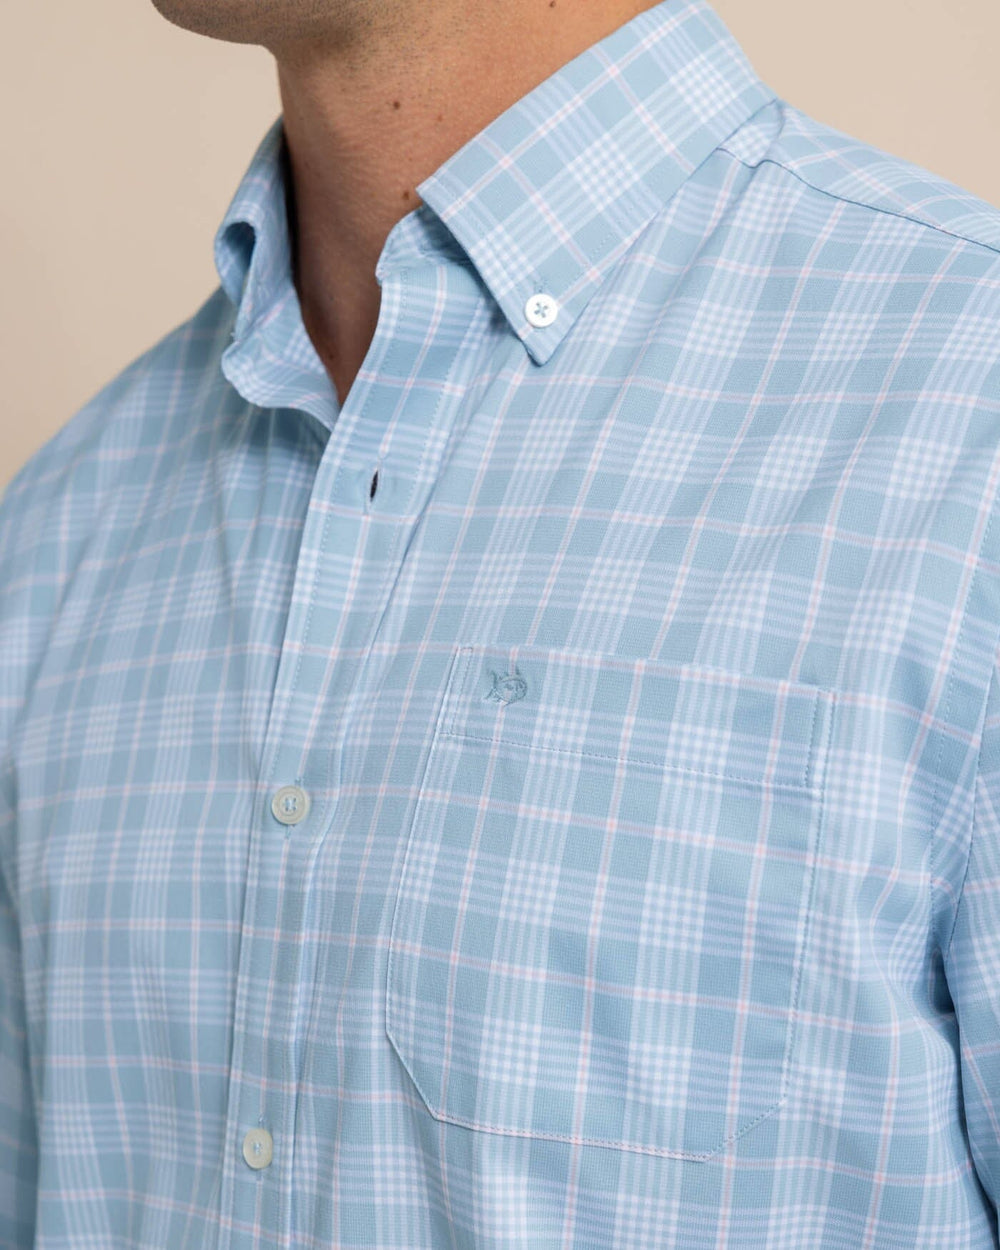 The detail view of the Southern Tide Intercoastal Primrose Plaid Long Sleeve Sport Shirt by Southern Tide - Subdued Blue